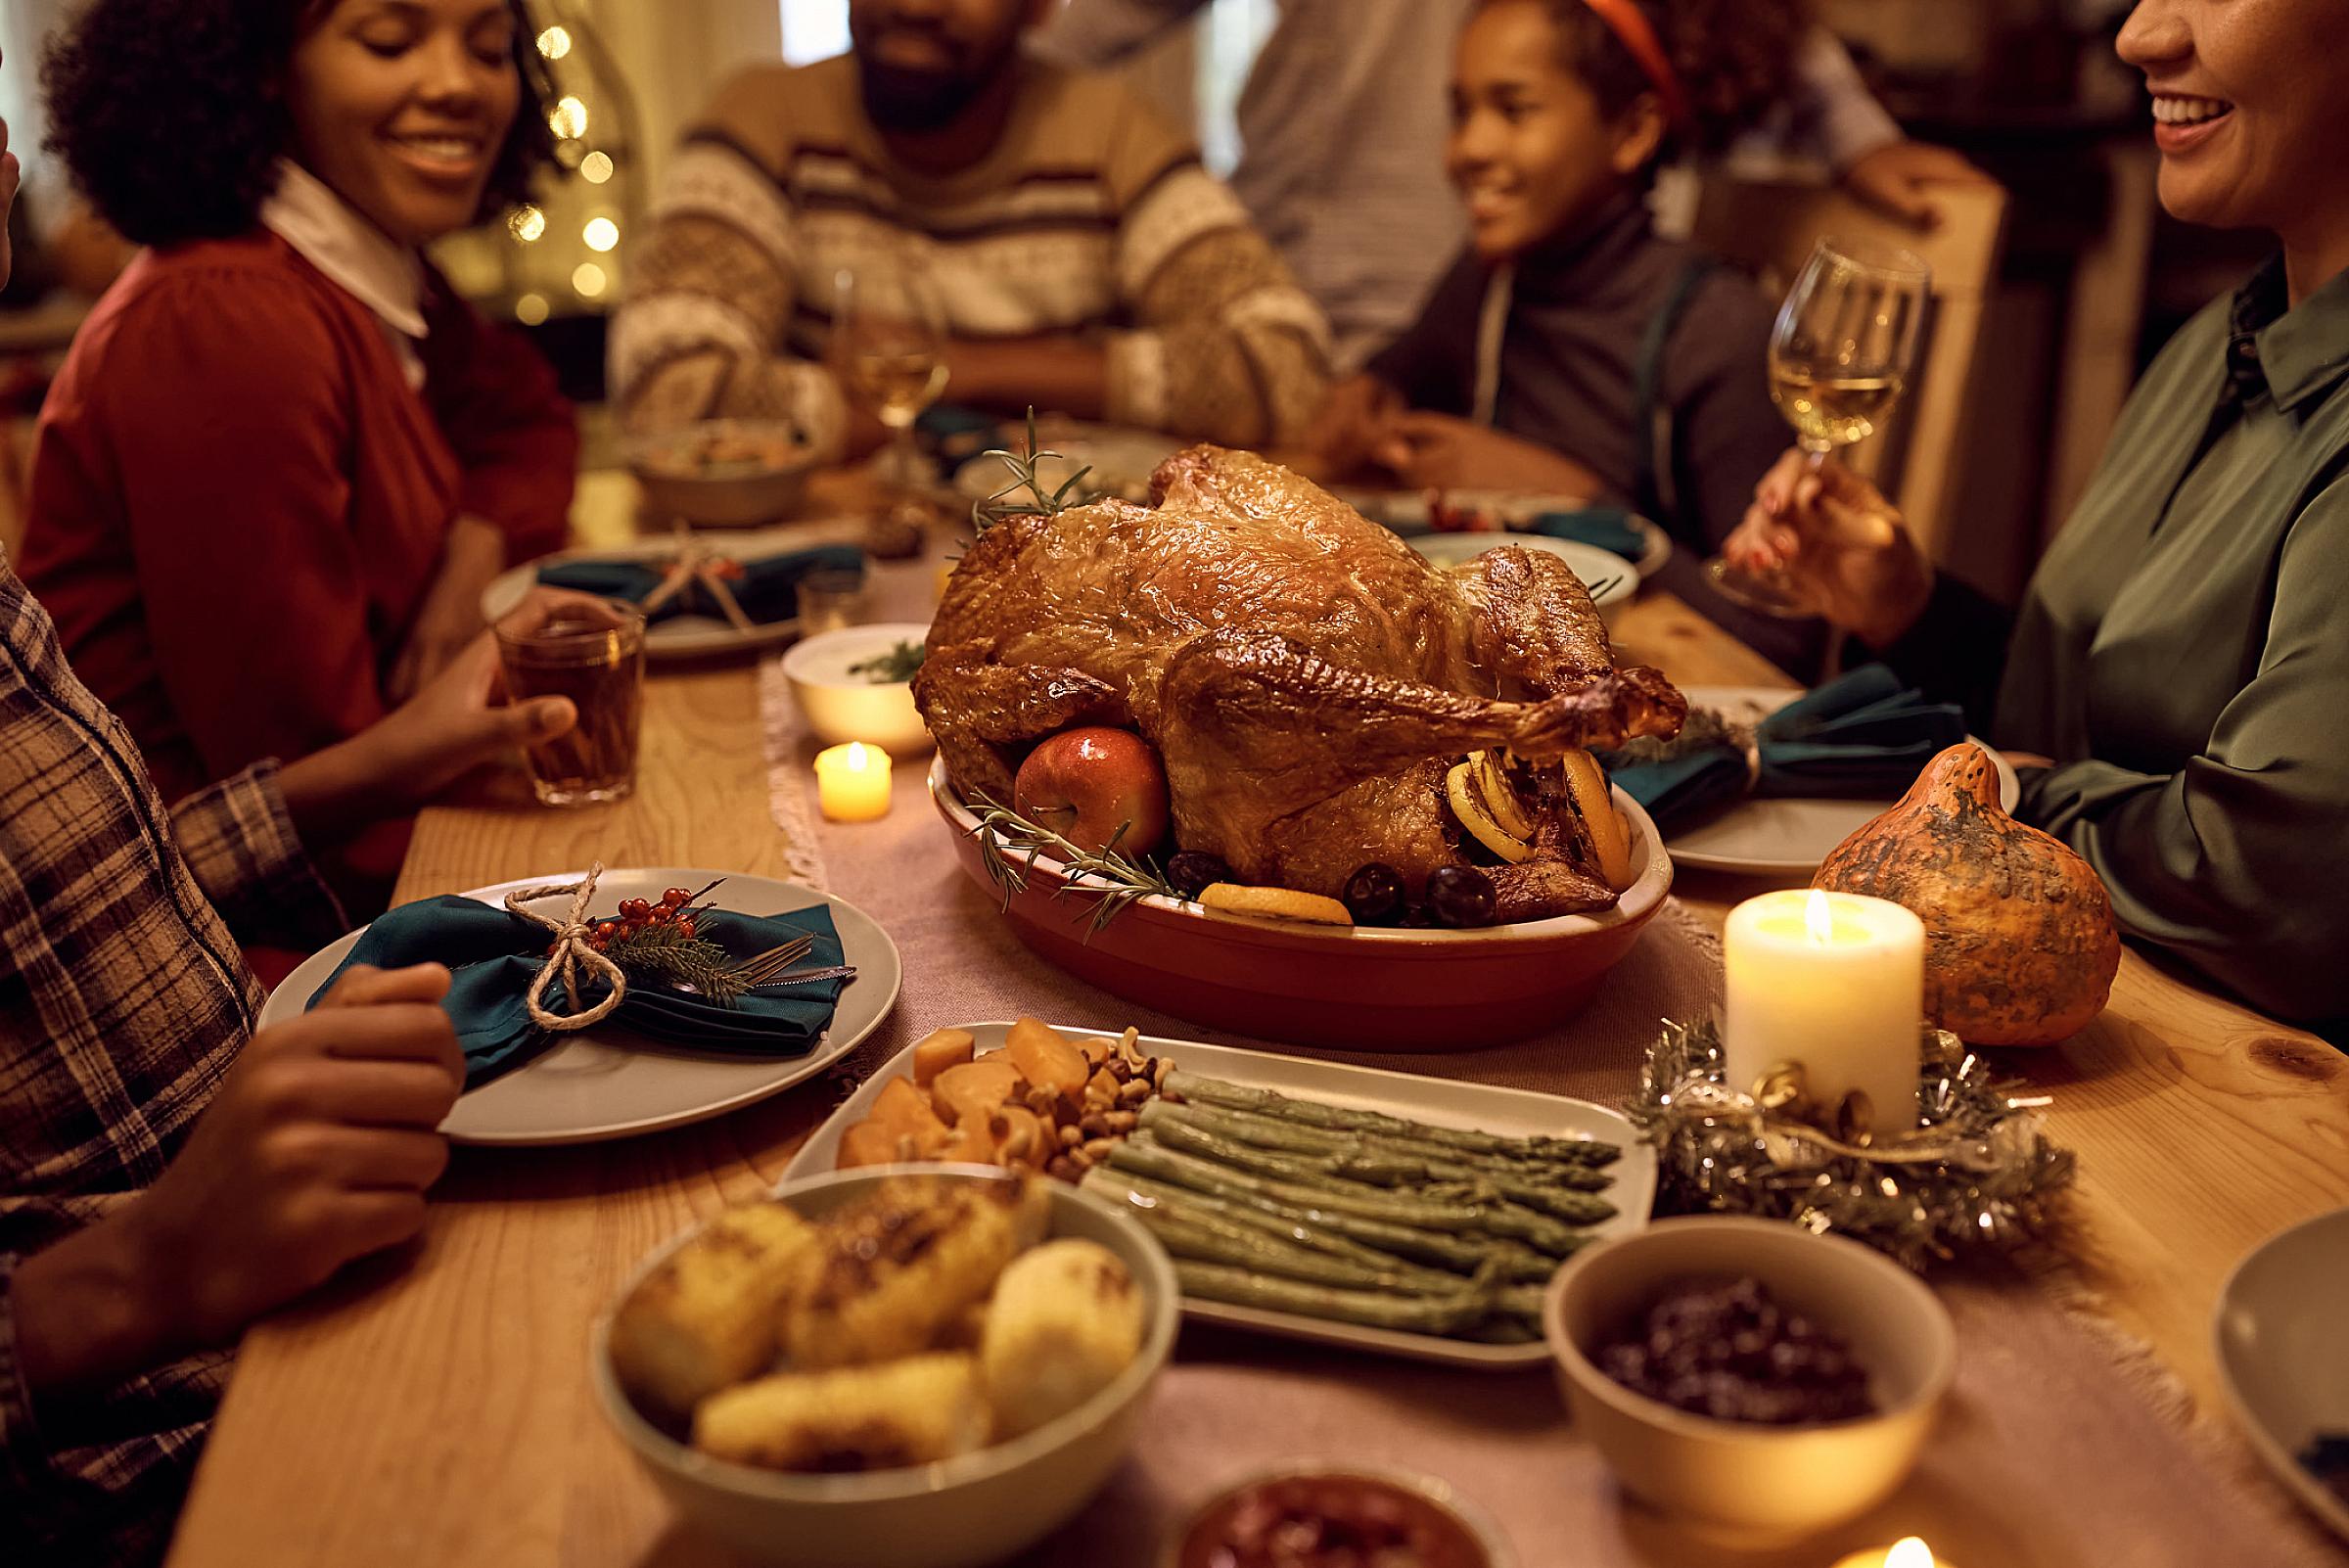 Large family gathered around a table with a turkey and several side dishes